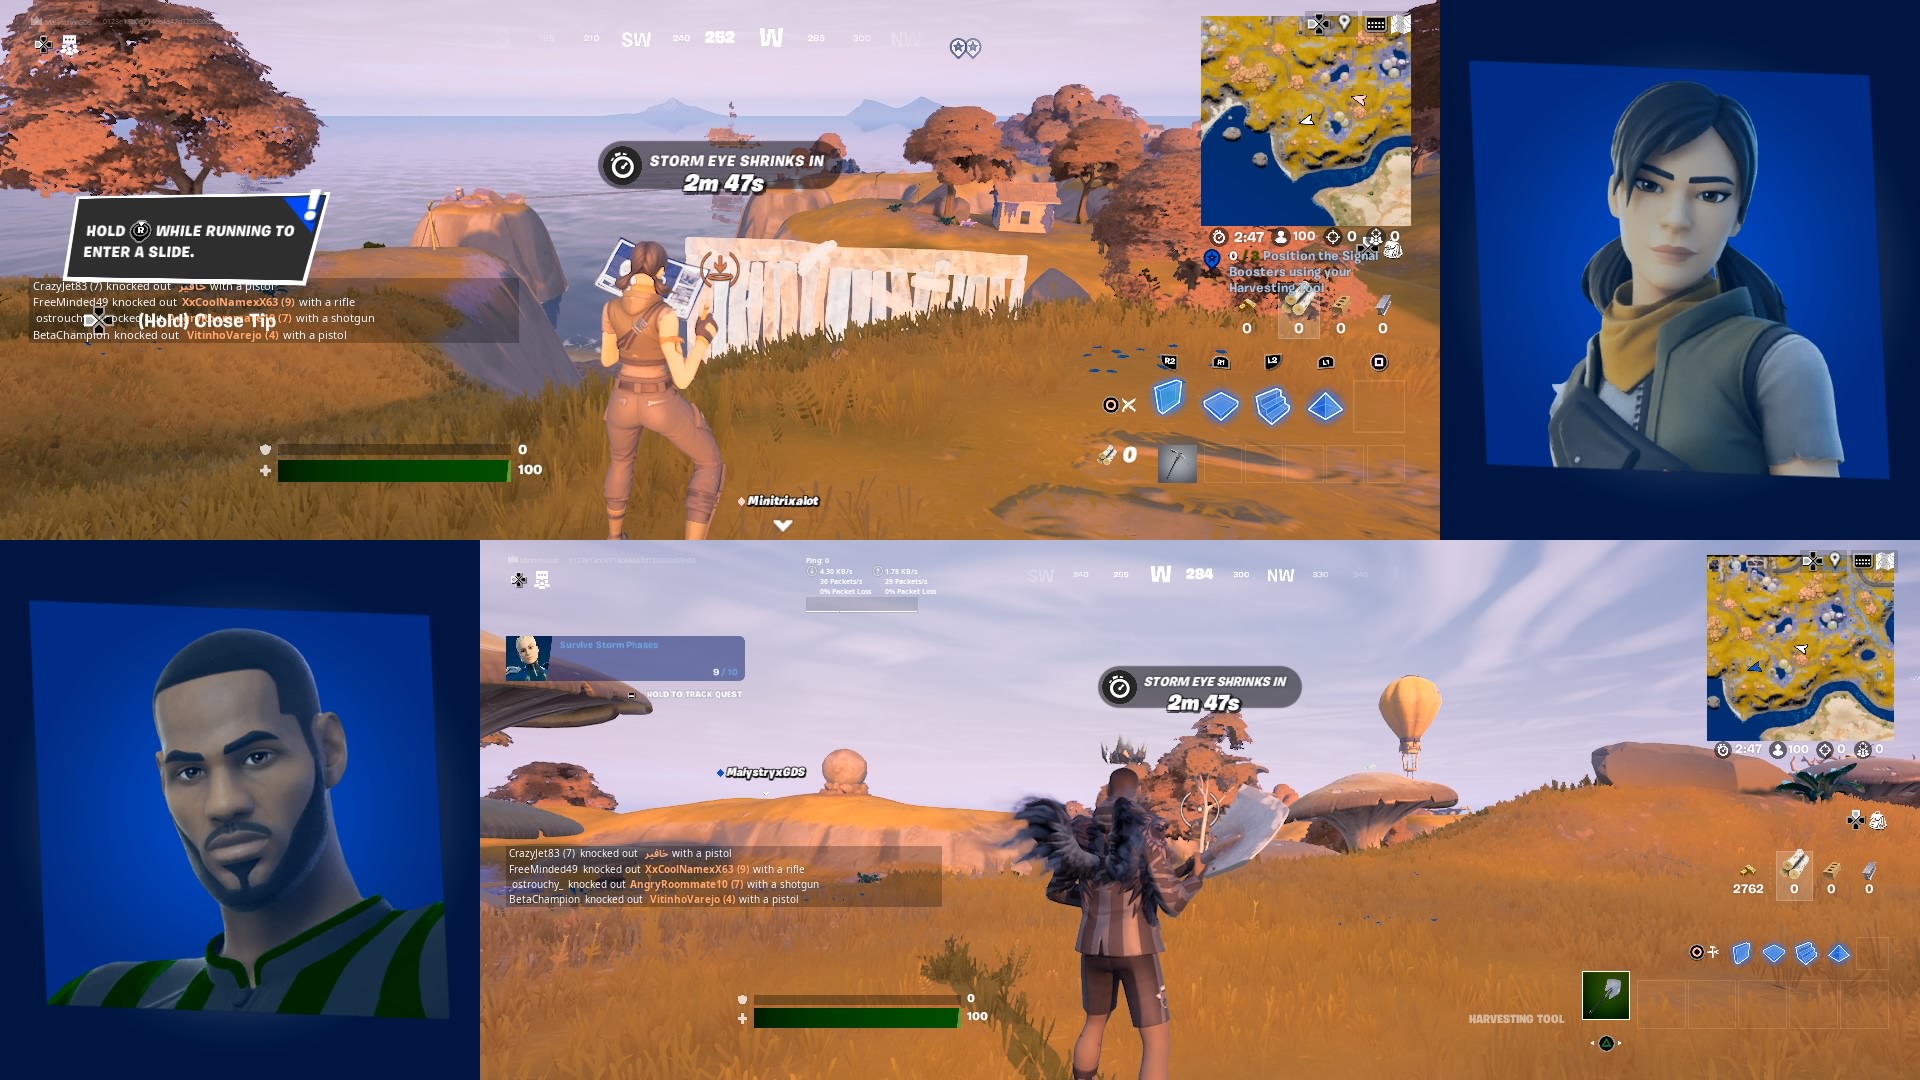 Fortnite Split Screen: How to Play with Friends on One Console